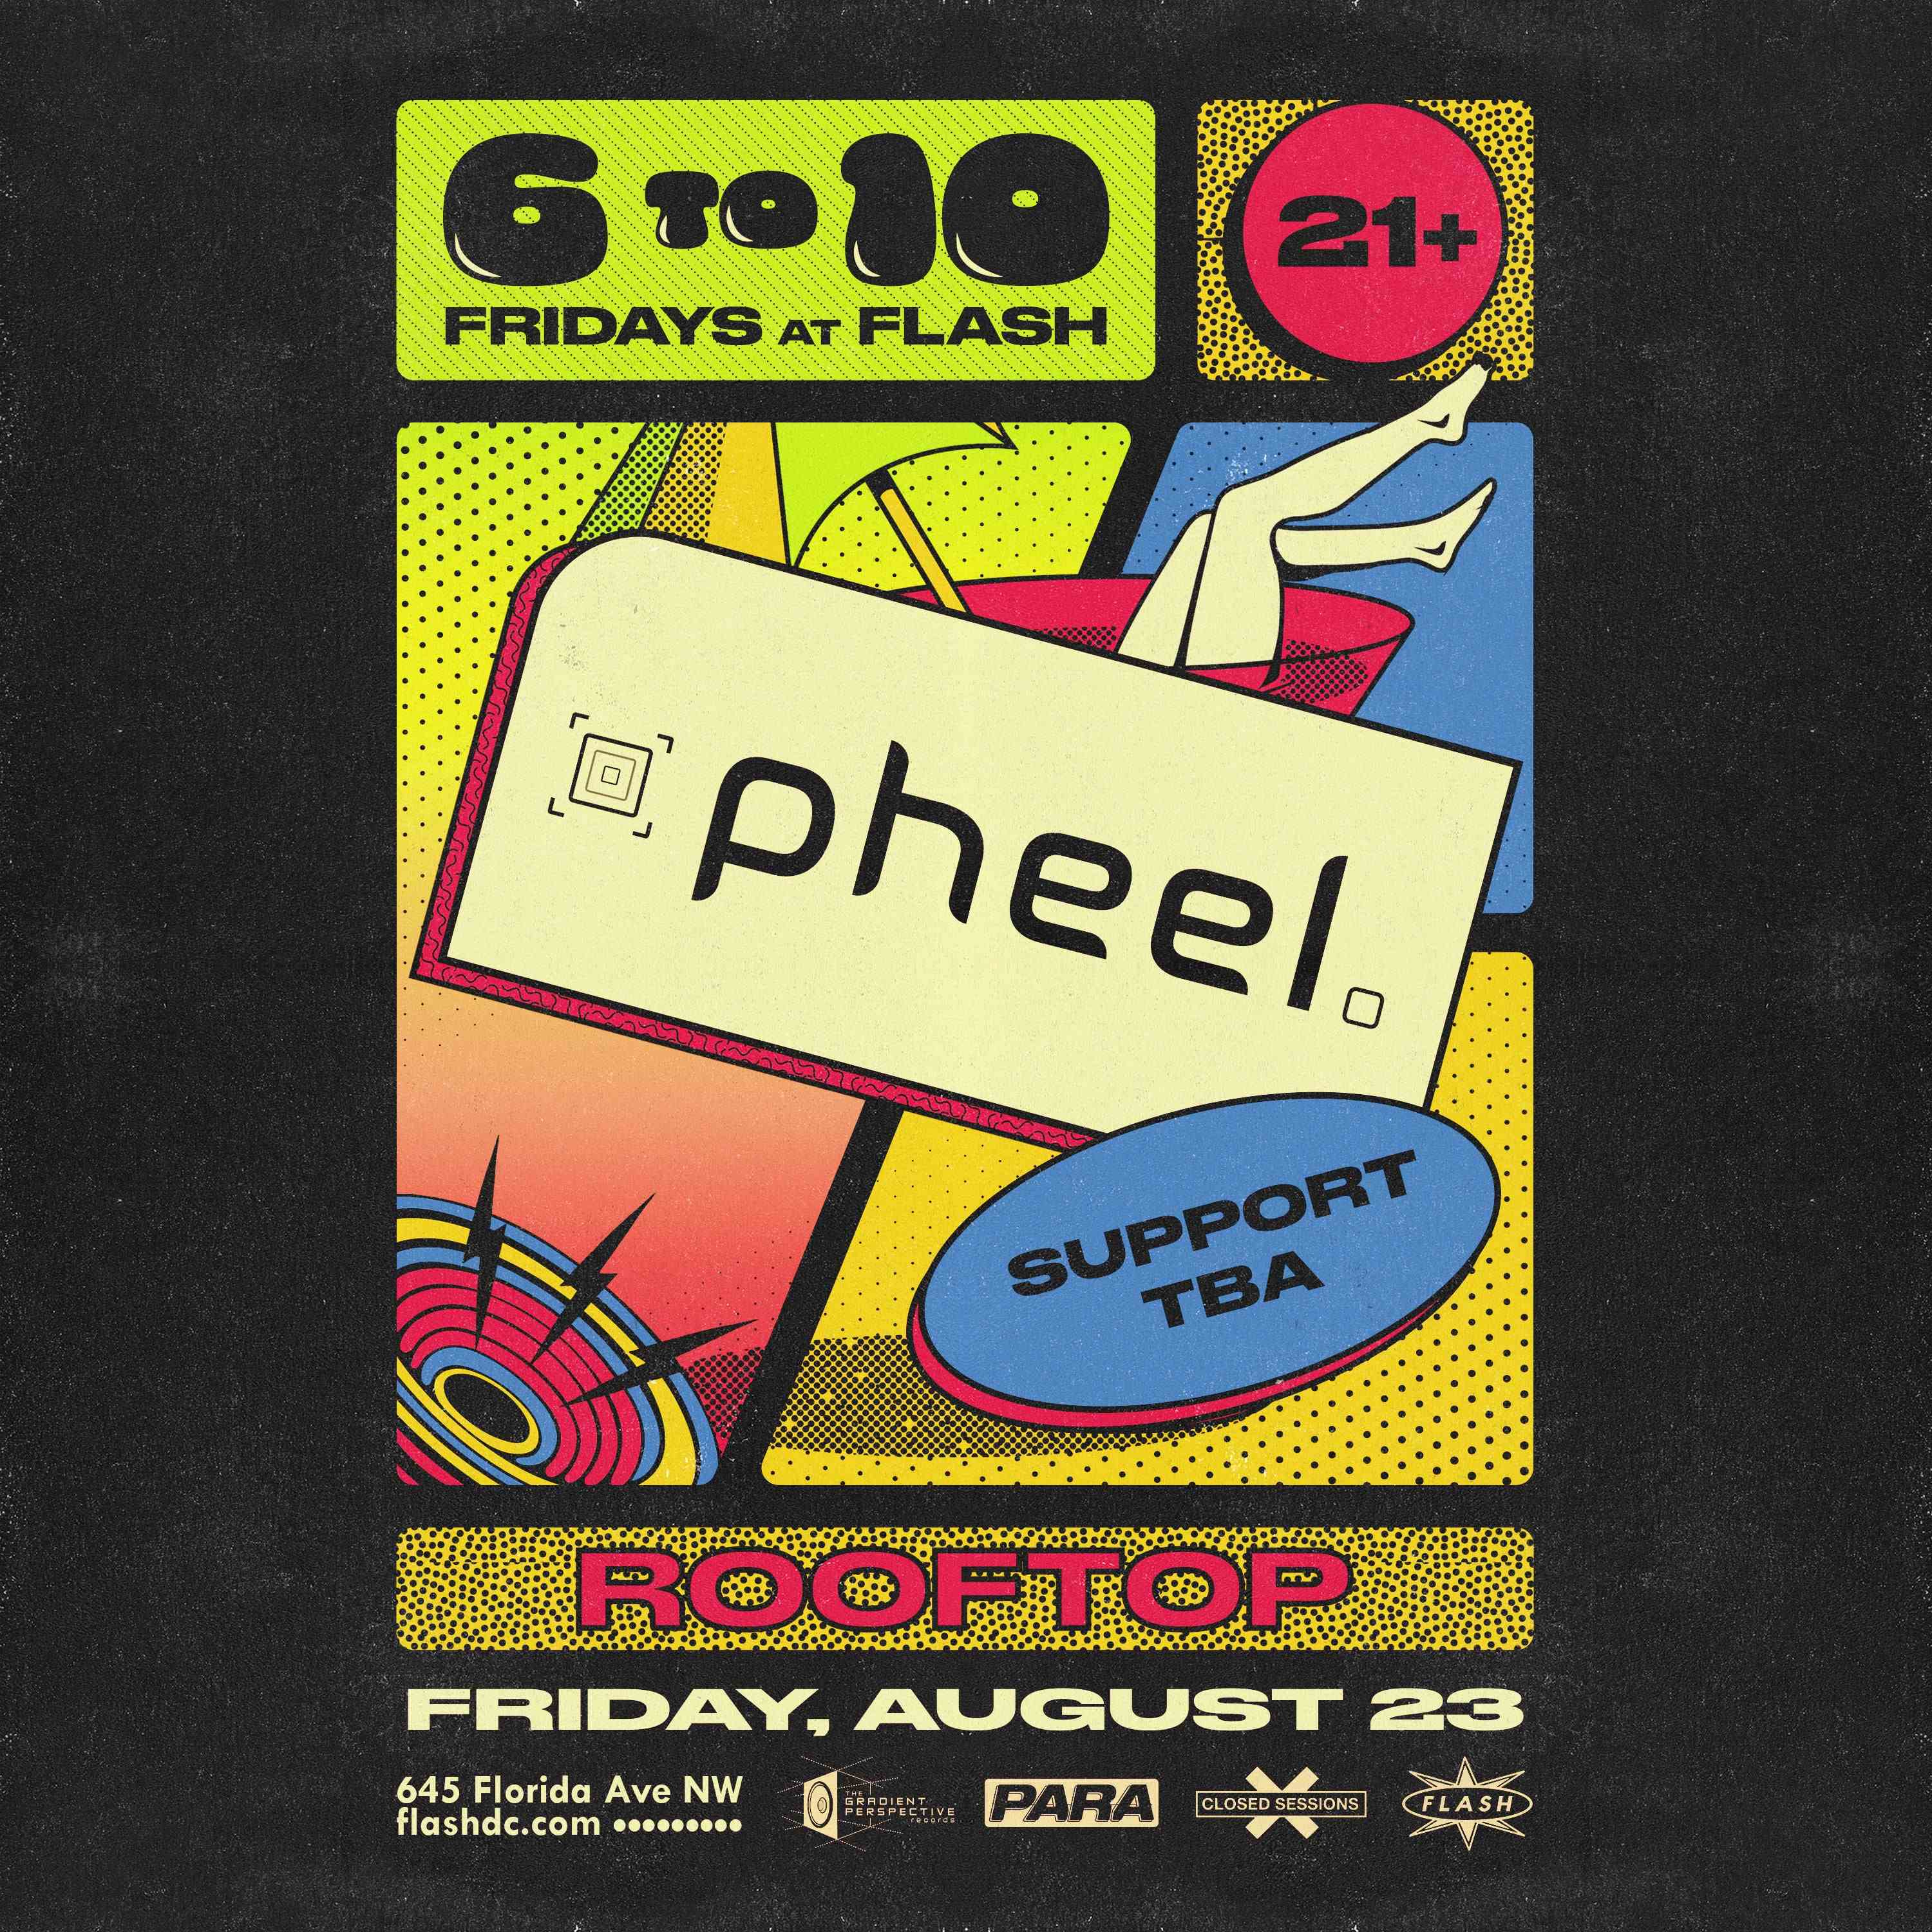 6to10: Pheel at Flash Rooftop event flyer